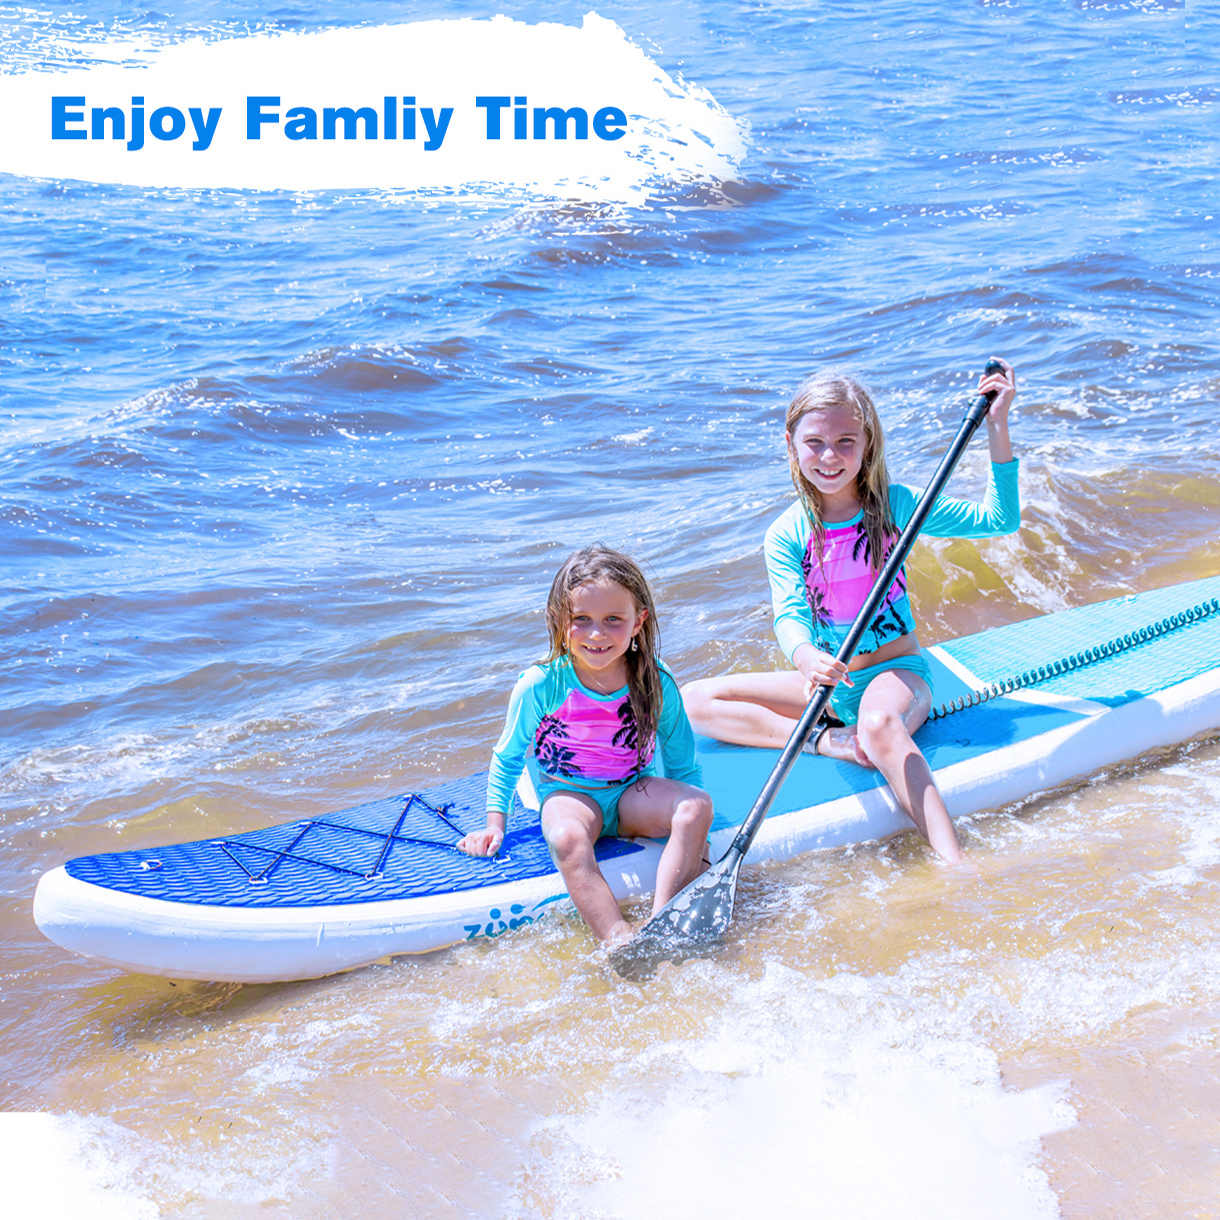 Enjoy Famliy Time 10'x30"x6" Inflatable SUP Paddle Board